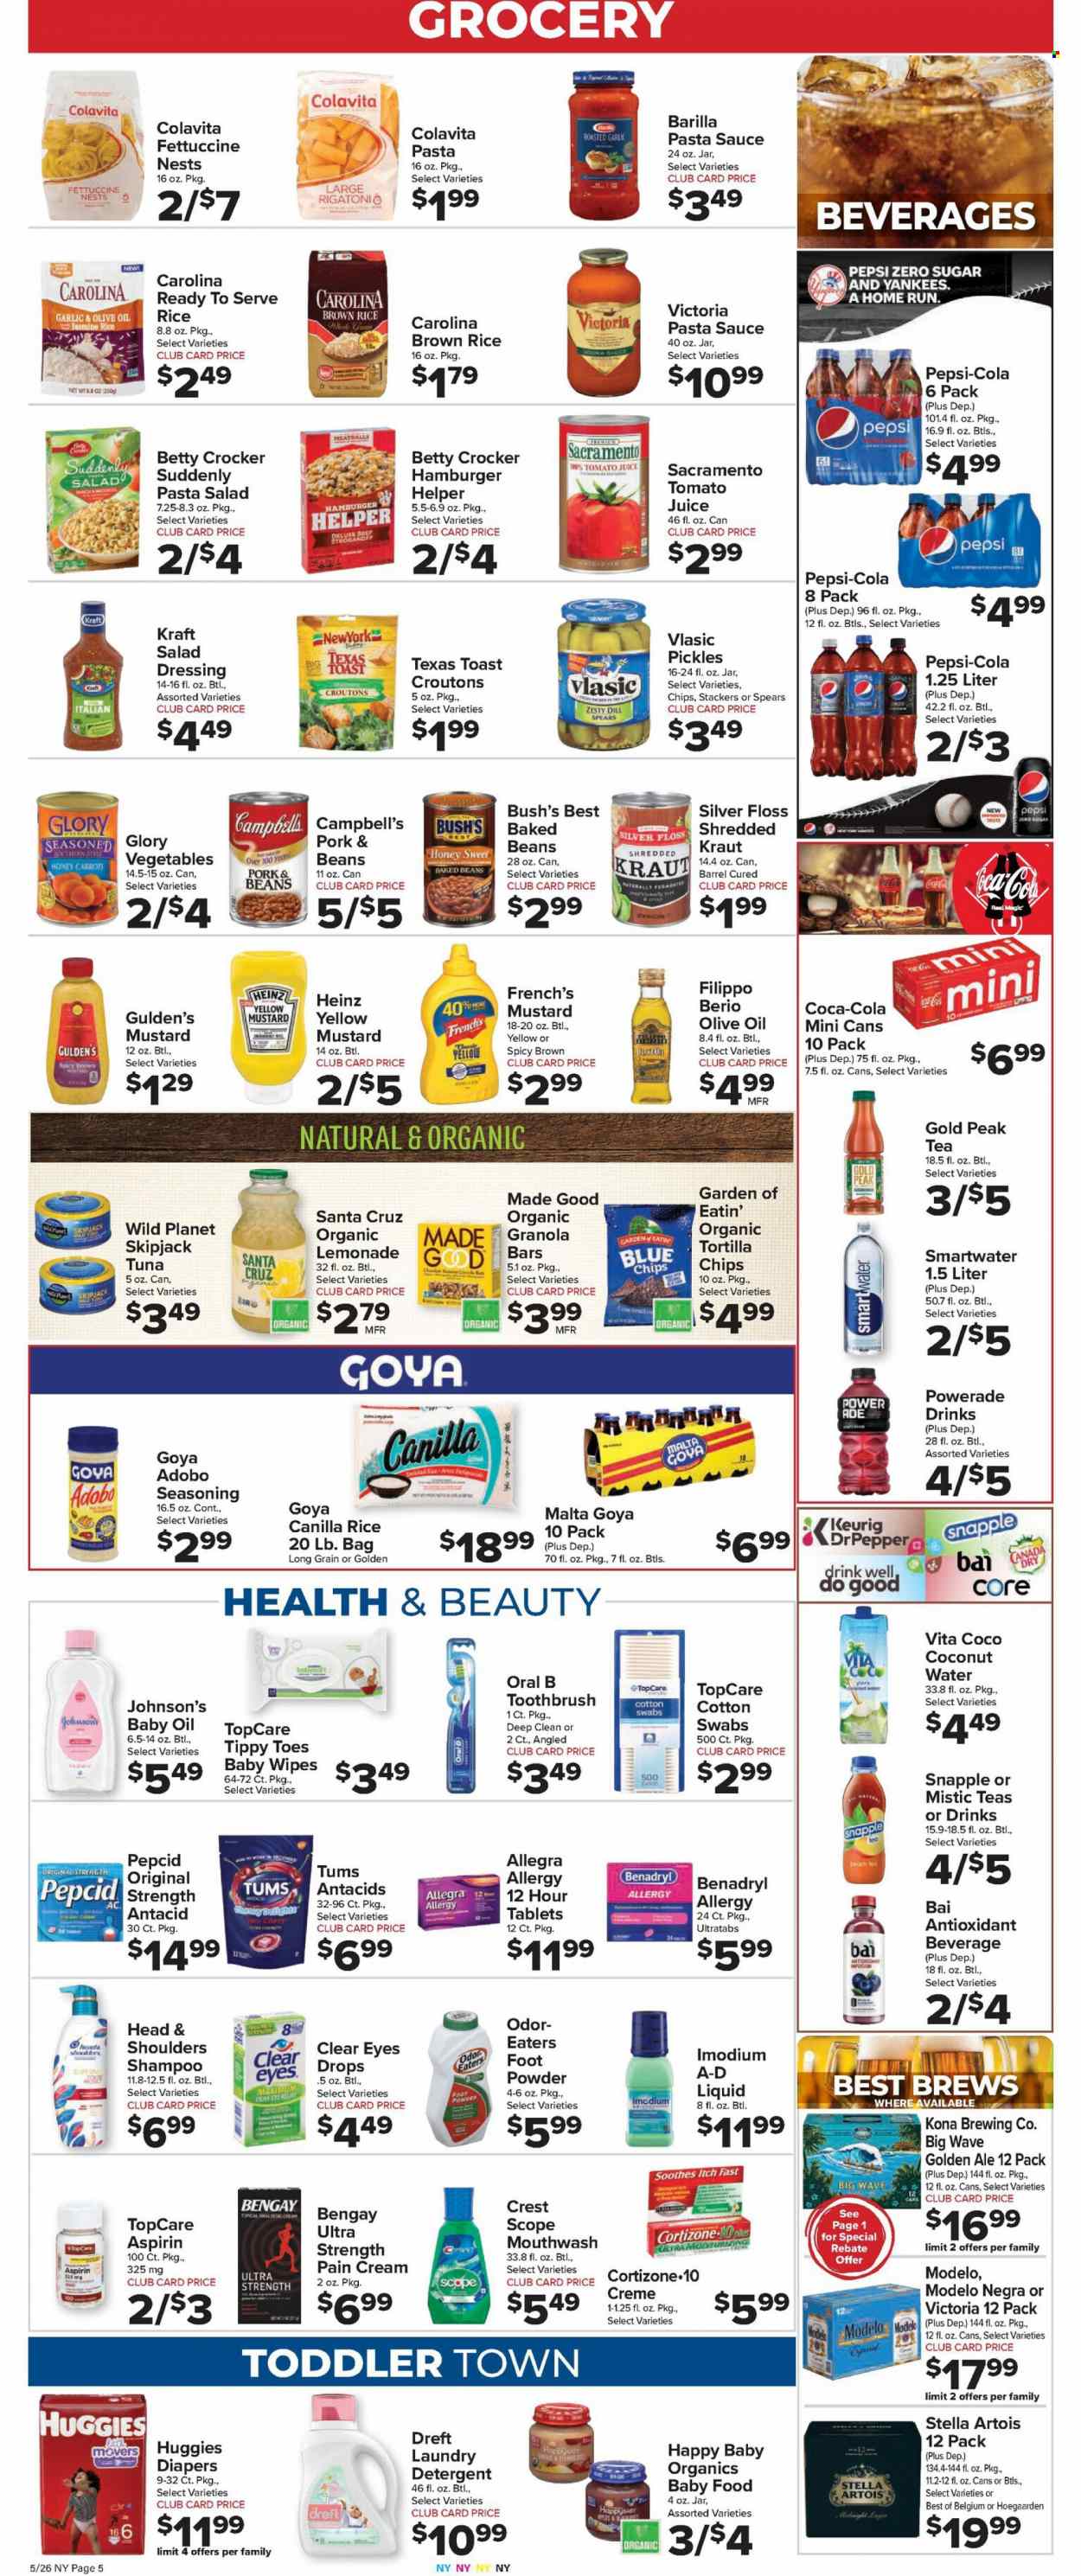 thumbnail - Foodtown Flyer - 05/26/2023 - 06/01/2023 - Sales products - tart, beans, carrots, cherries, tuna, Campbell's, pasta sauce, meatballs, sauce, Barilla, Kraft®, ready meal, pasta salad, tortilla chips, chips, croutons, Heinz, pickles, baked beans, Goya, granola bar, brown rice, rice, jasmine rice, dill, spice, adobo sauce, mustard, salad dressing, dressing, olive oil, oil, honey, Canada Dry, Coca-Cola, lemonade, tomato juice, Powerade, Pepsi, juice, energy drink, ice tea, coconut water, soft drink, Snapple, Gold Peak Tea, Bai, Smartwater, water, Keurig, beer, Stella Artois, Modelo, wipes, Huggies, baby wipes, nappies, Johnson's, baby oil, detergent, laundry detergent, WAVE, shampoo, toothbrush, Oral-B, mouthwash, Crest, Head & Shoulders, foot powder, rose, Imodium, Pepcid, Bengay, Antacid, aspirin, Benadryl. Page 7.